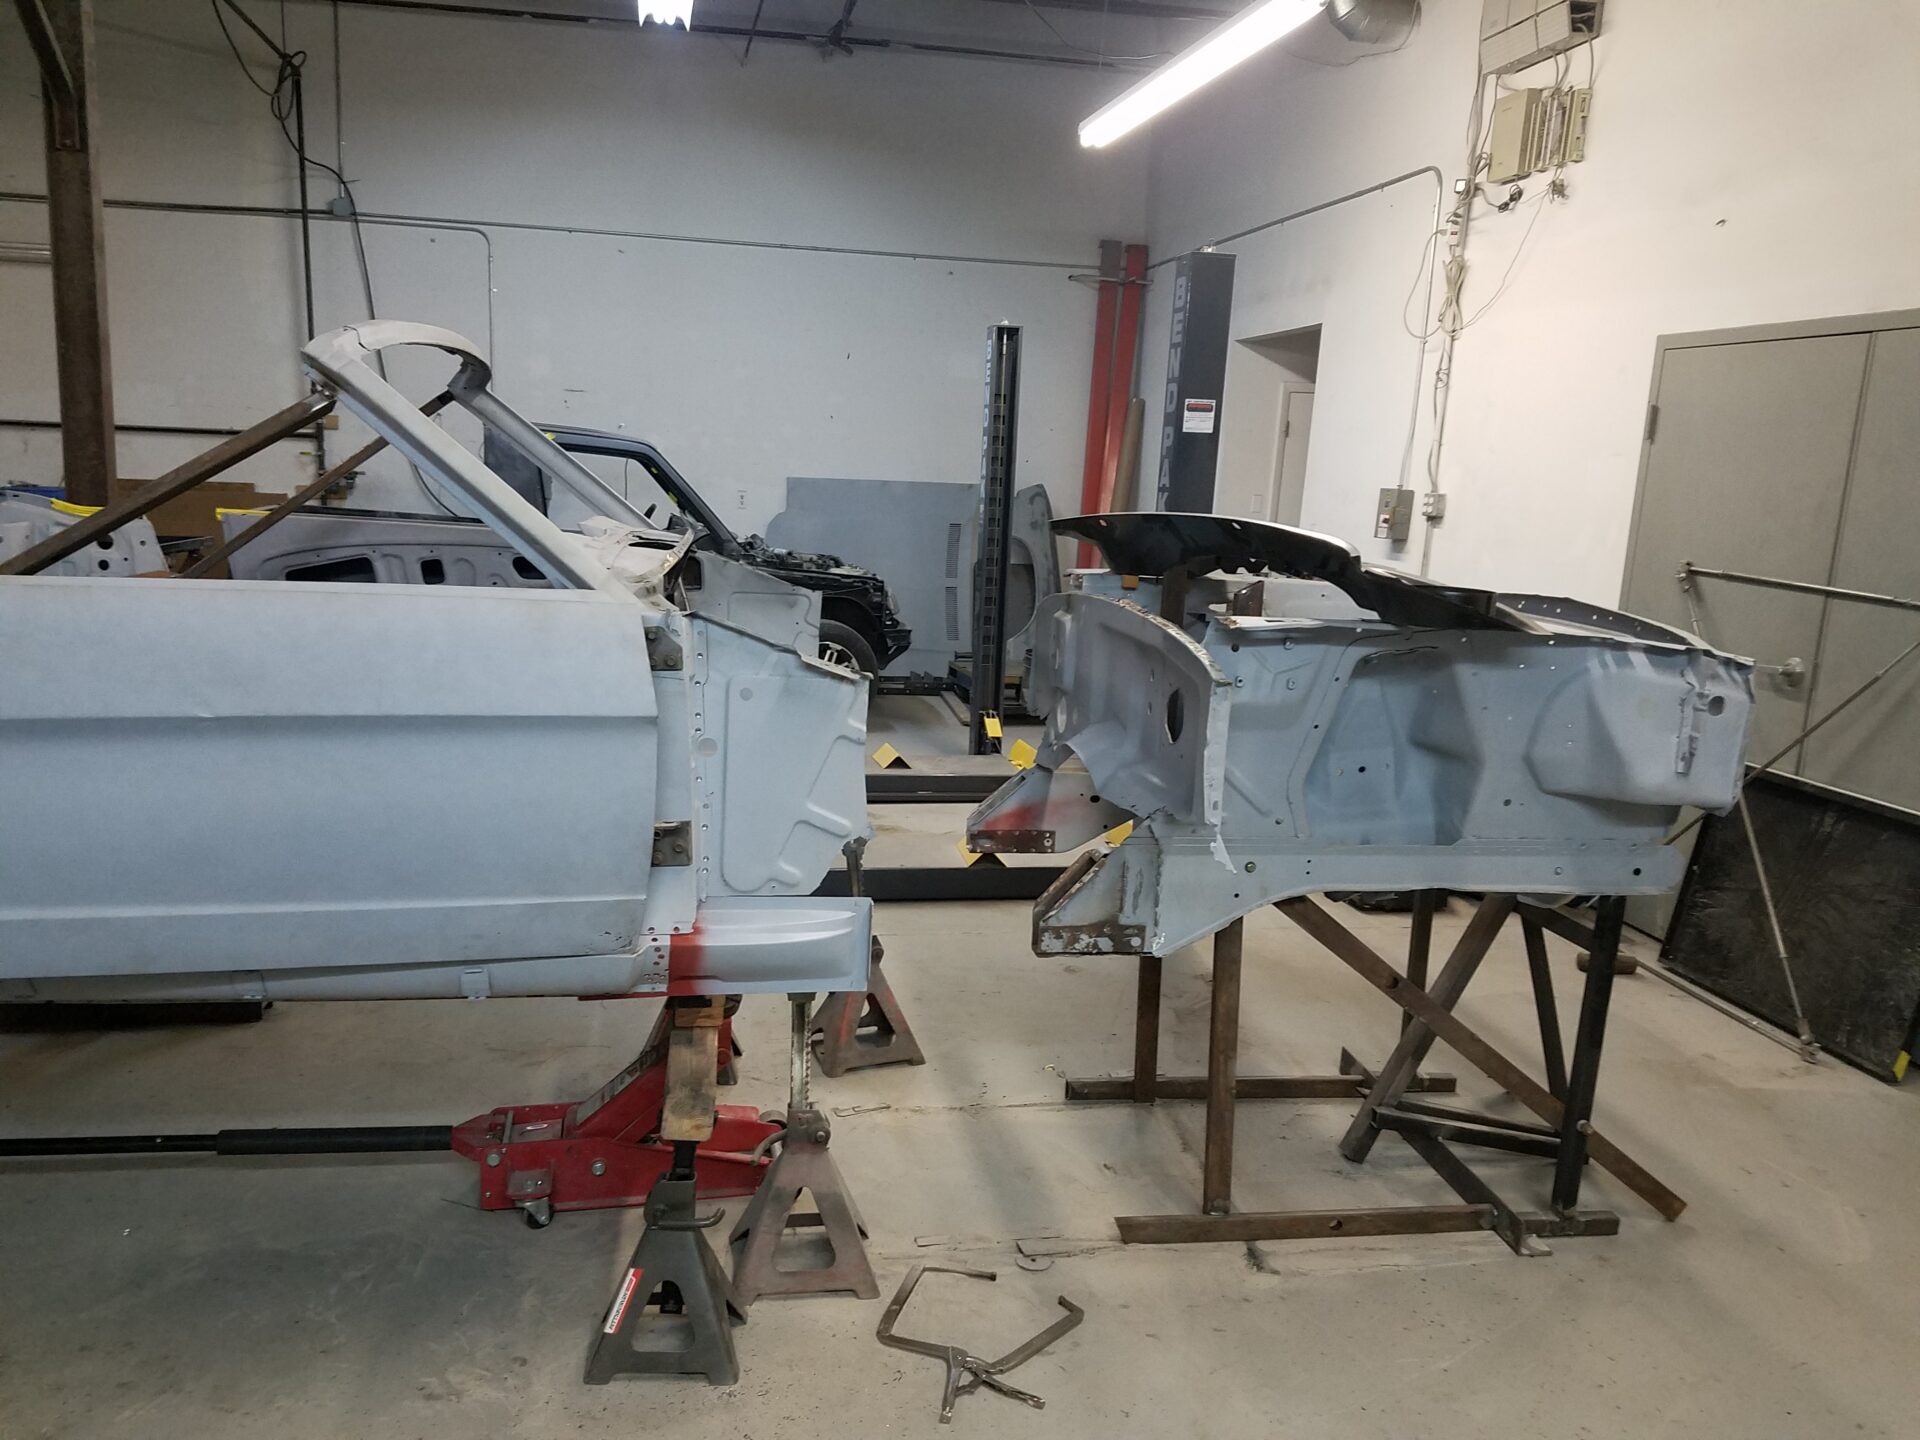 Separating the front of the car from the body